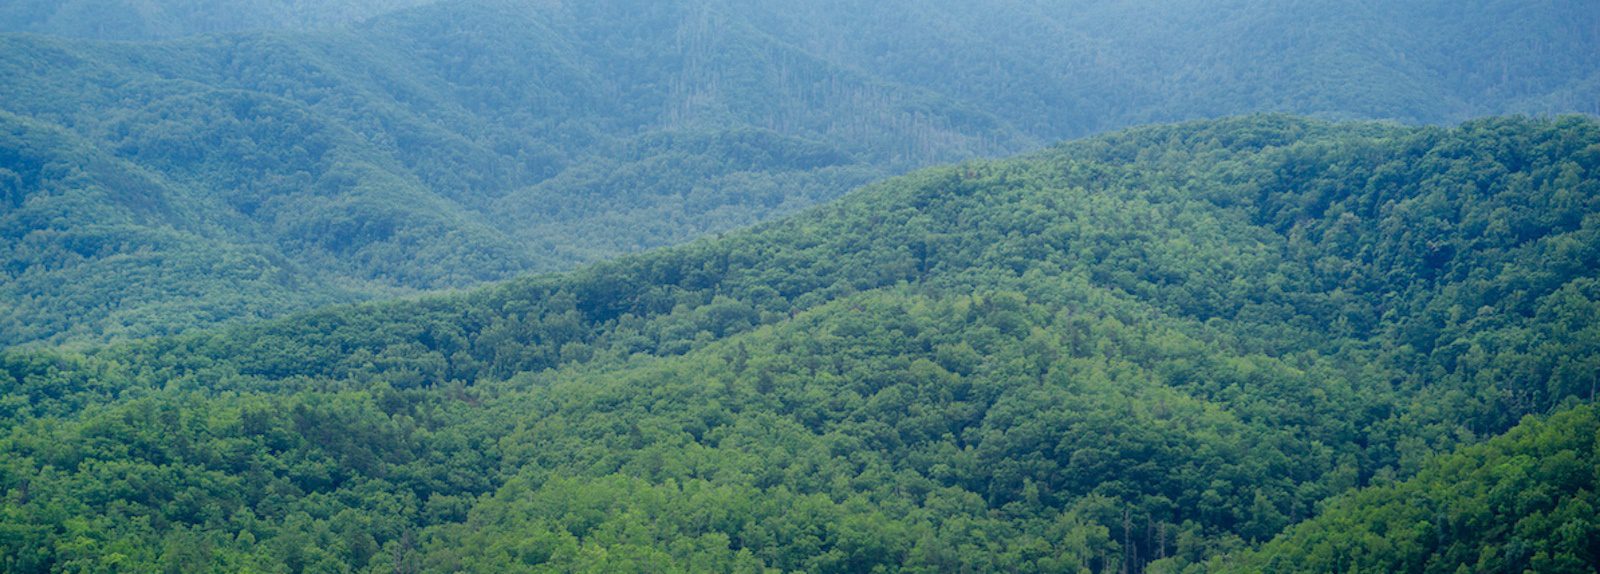 10 Fun Facts About the Smoky Mountains That Might Surprise You